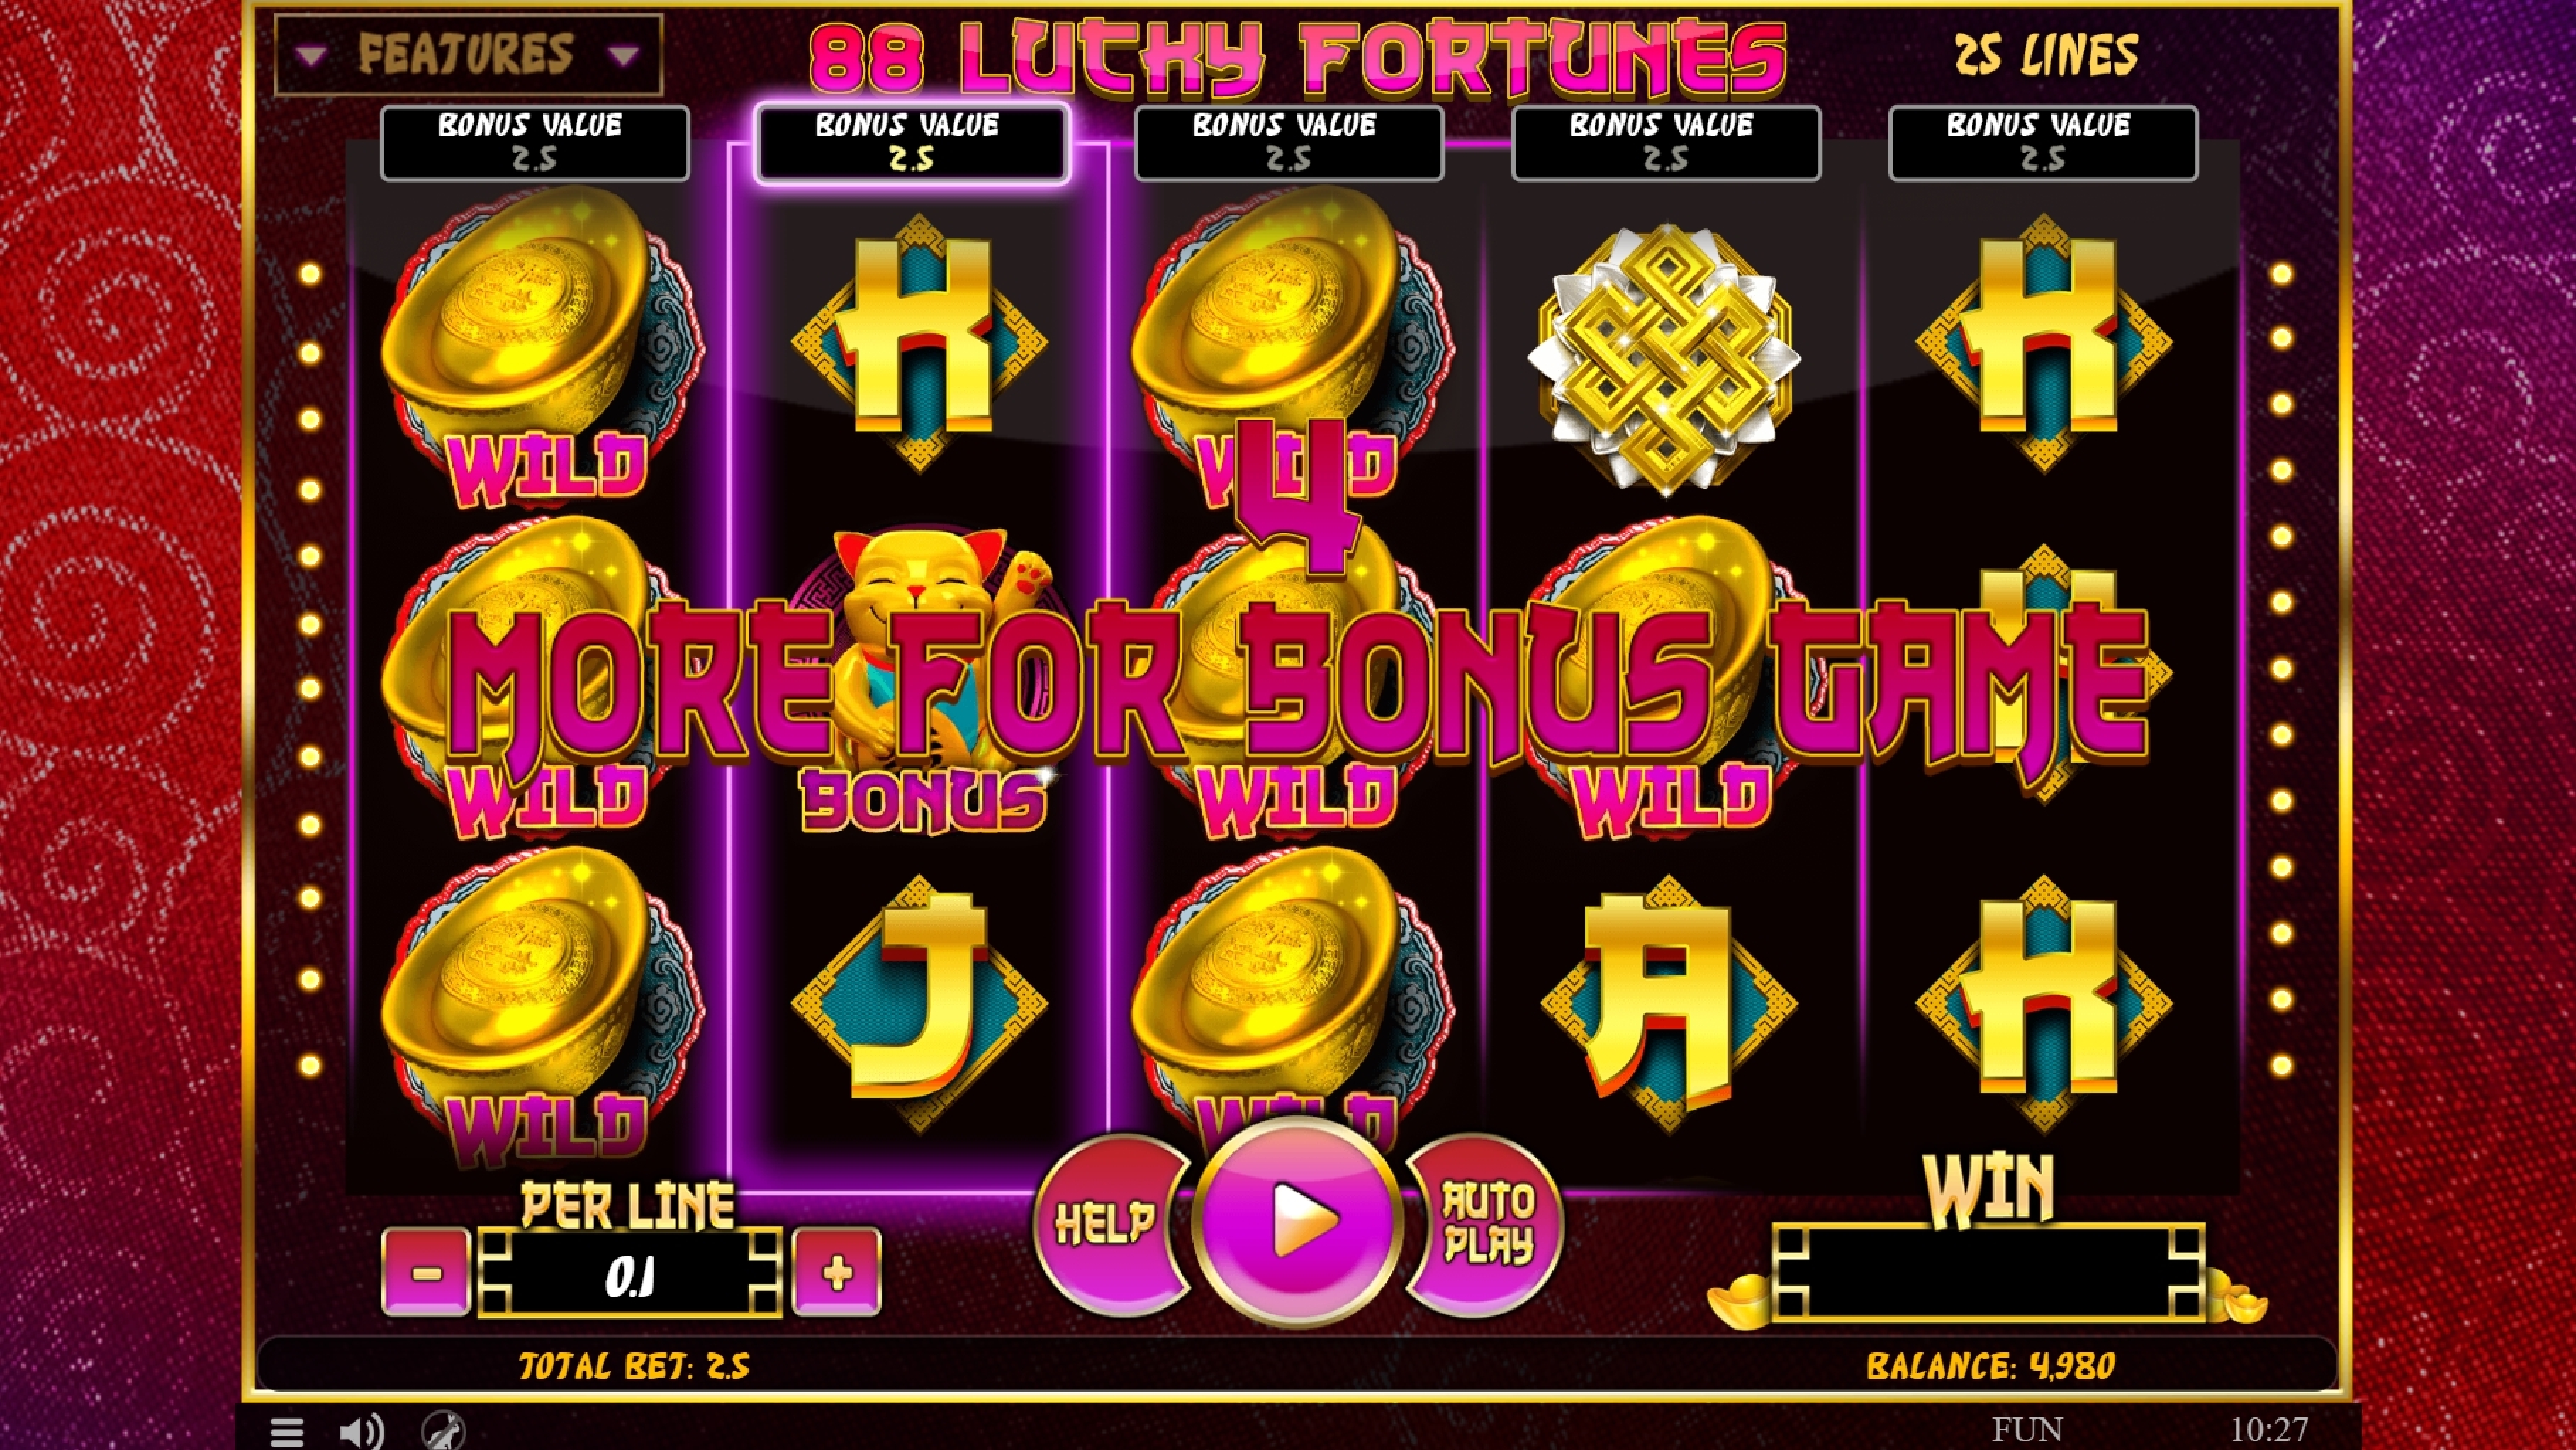 Win Money in 88 Lucky Fortunes Free Slot Game by Spinomenal